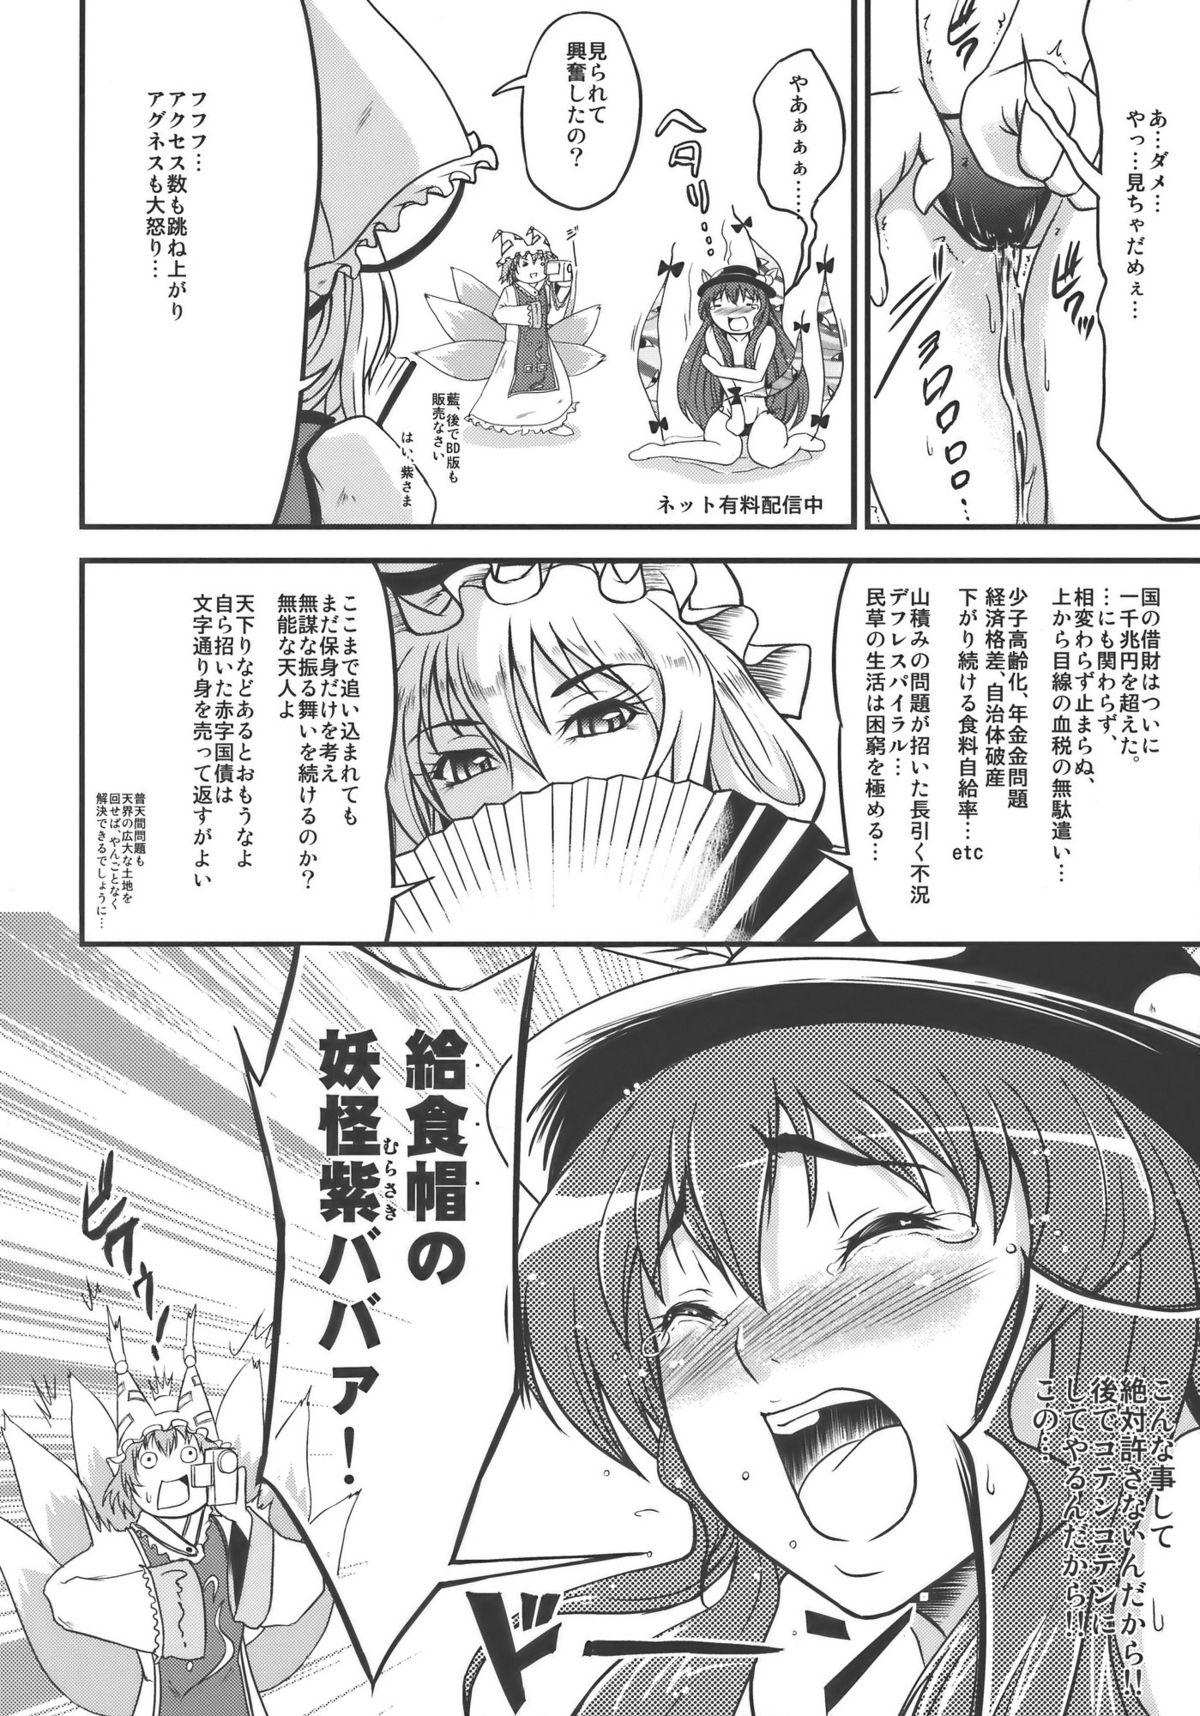 Livecams Touhou Hisouchin - Touhou project Celebrity - Page 8